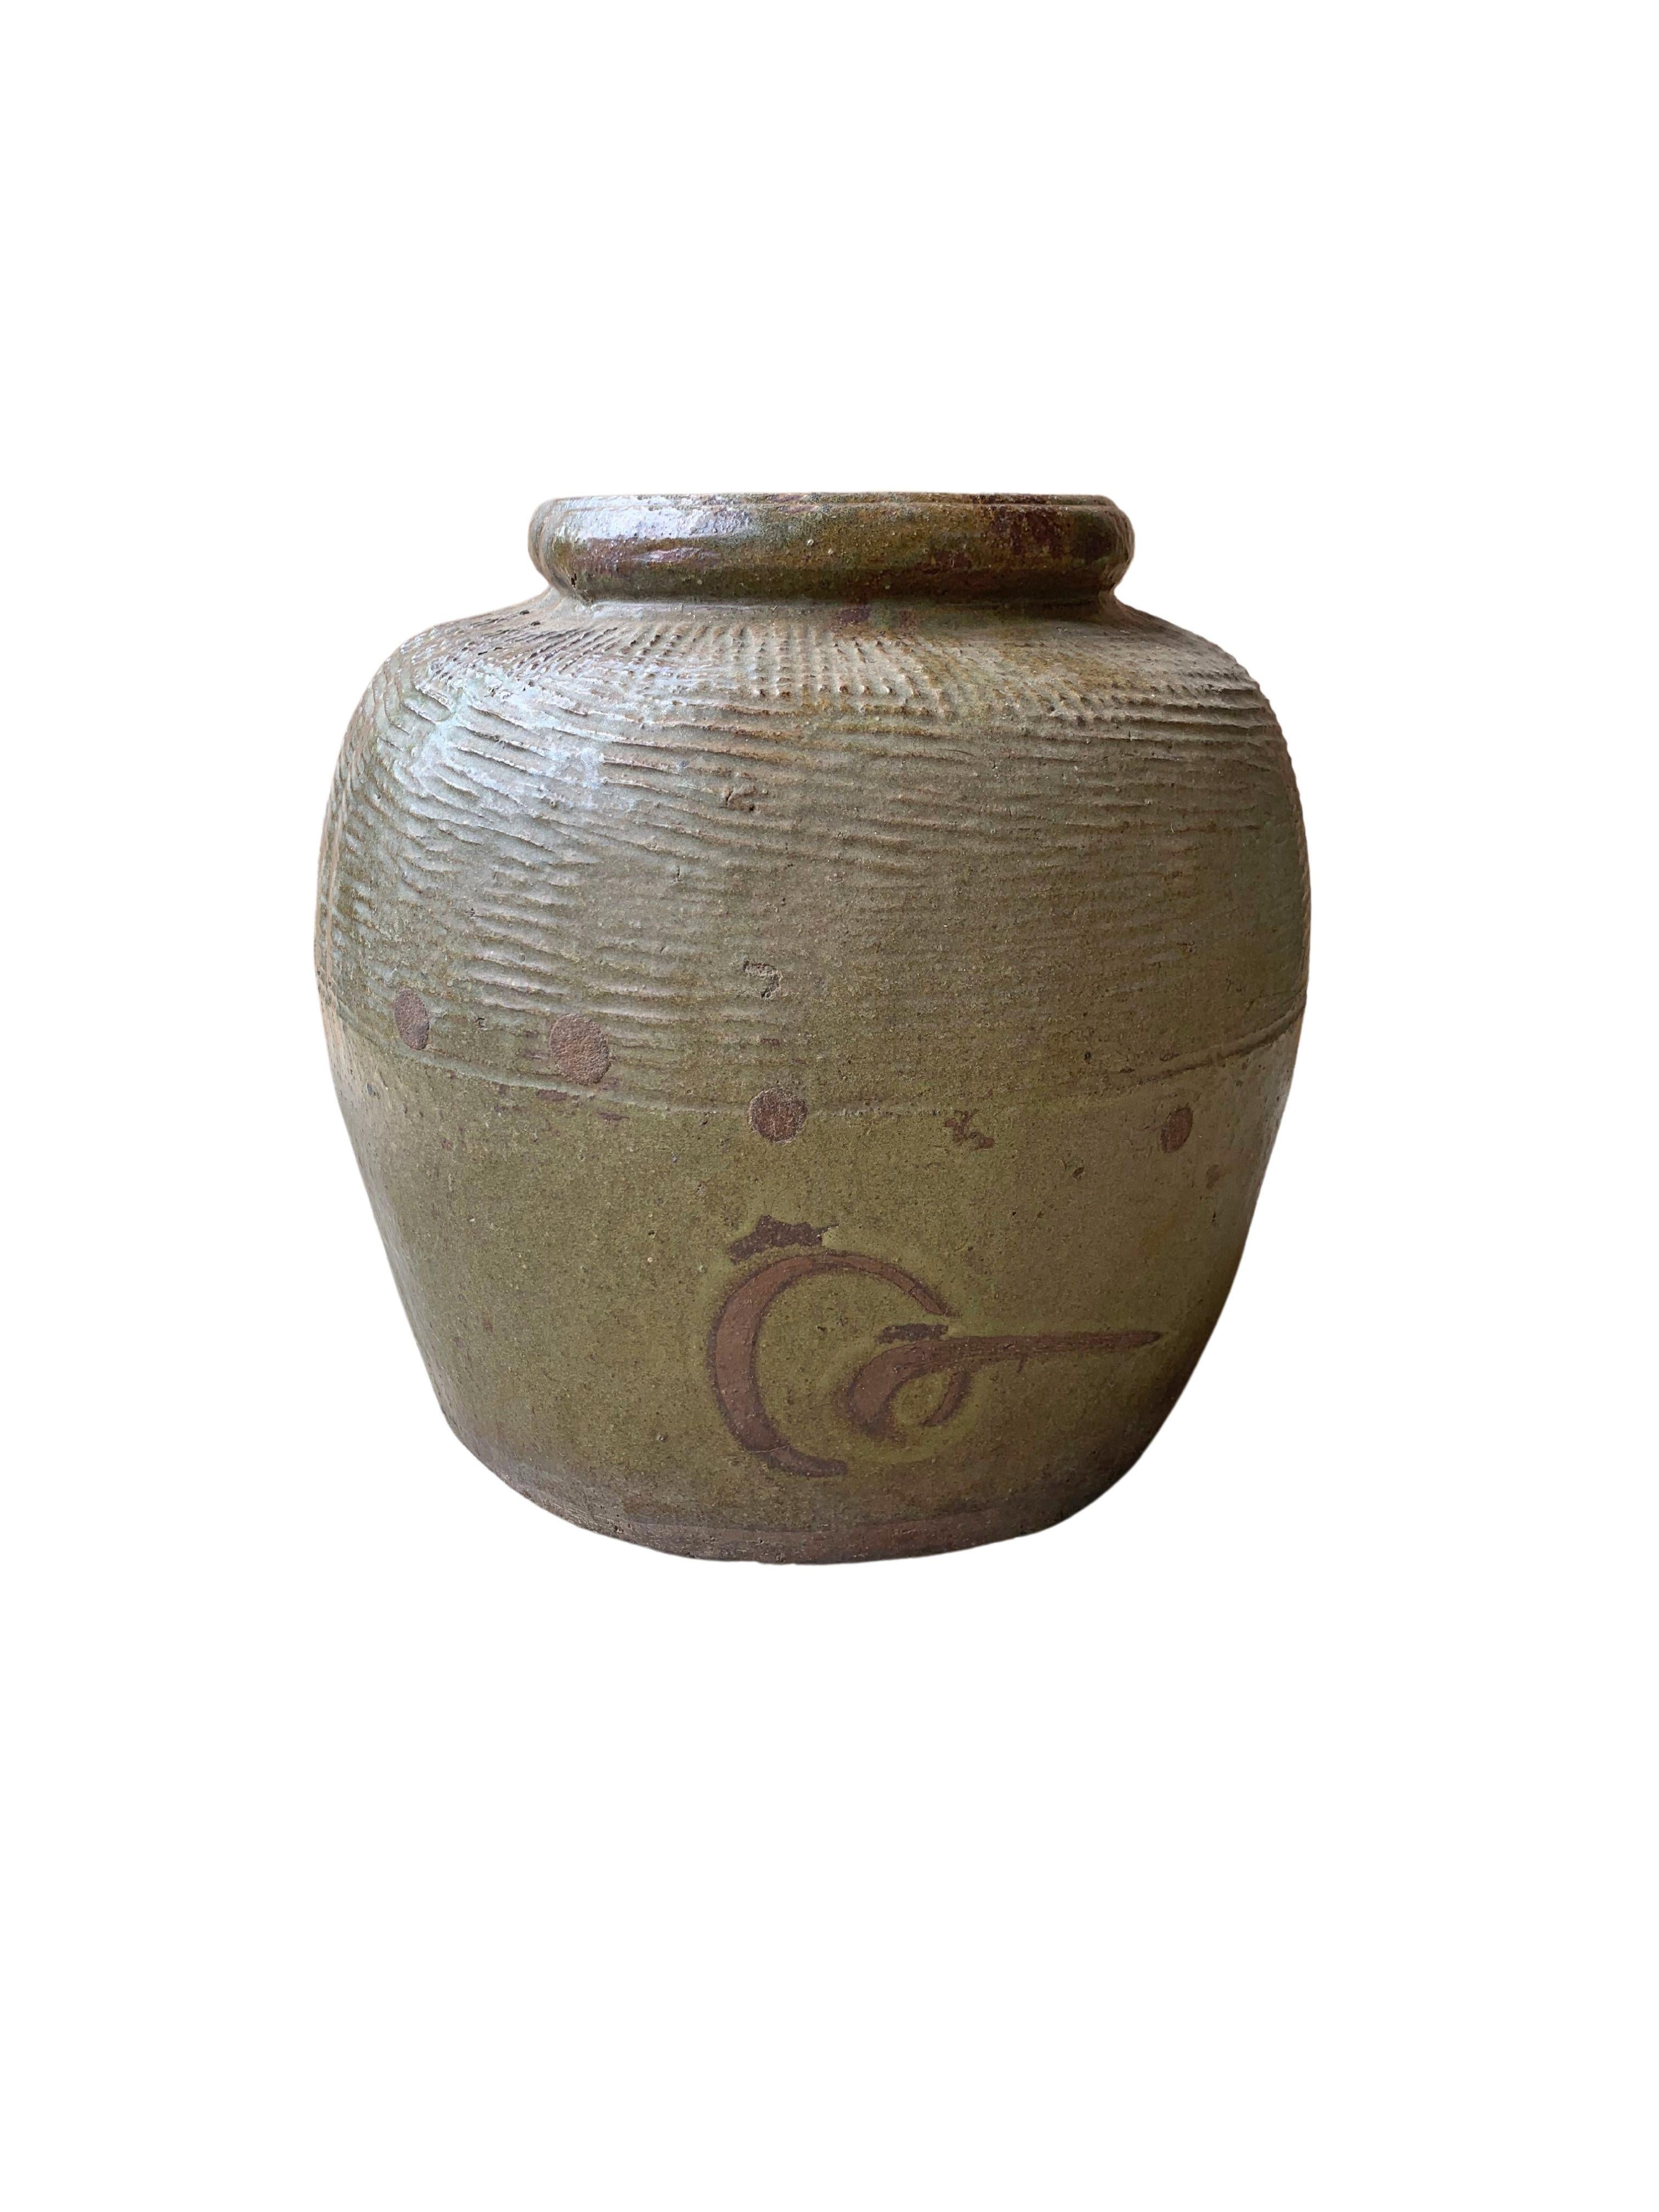 This glazed Chinese ceramic jar was once used for pickling foods. It features a jade green finish and outer surface that features a ribbed texture. A great example of Chinese pottery, with its imperfections and ageing over the years contributing to